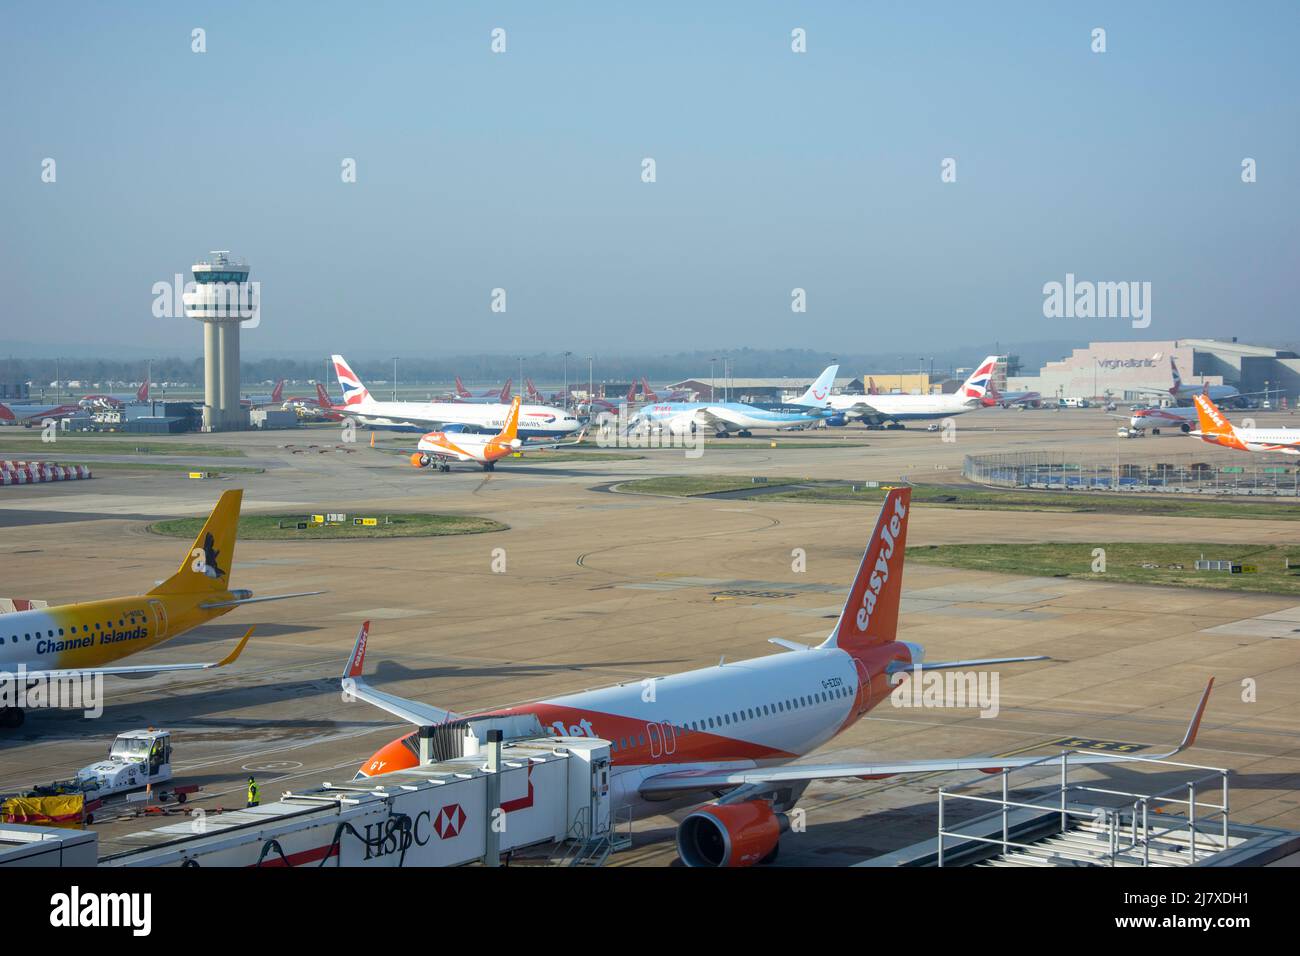 Aircraft parked on airside at North Terminal, London Gatwick Airport, Crawley, West Sussex, England, United Kingdom Stock Photo